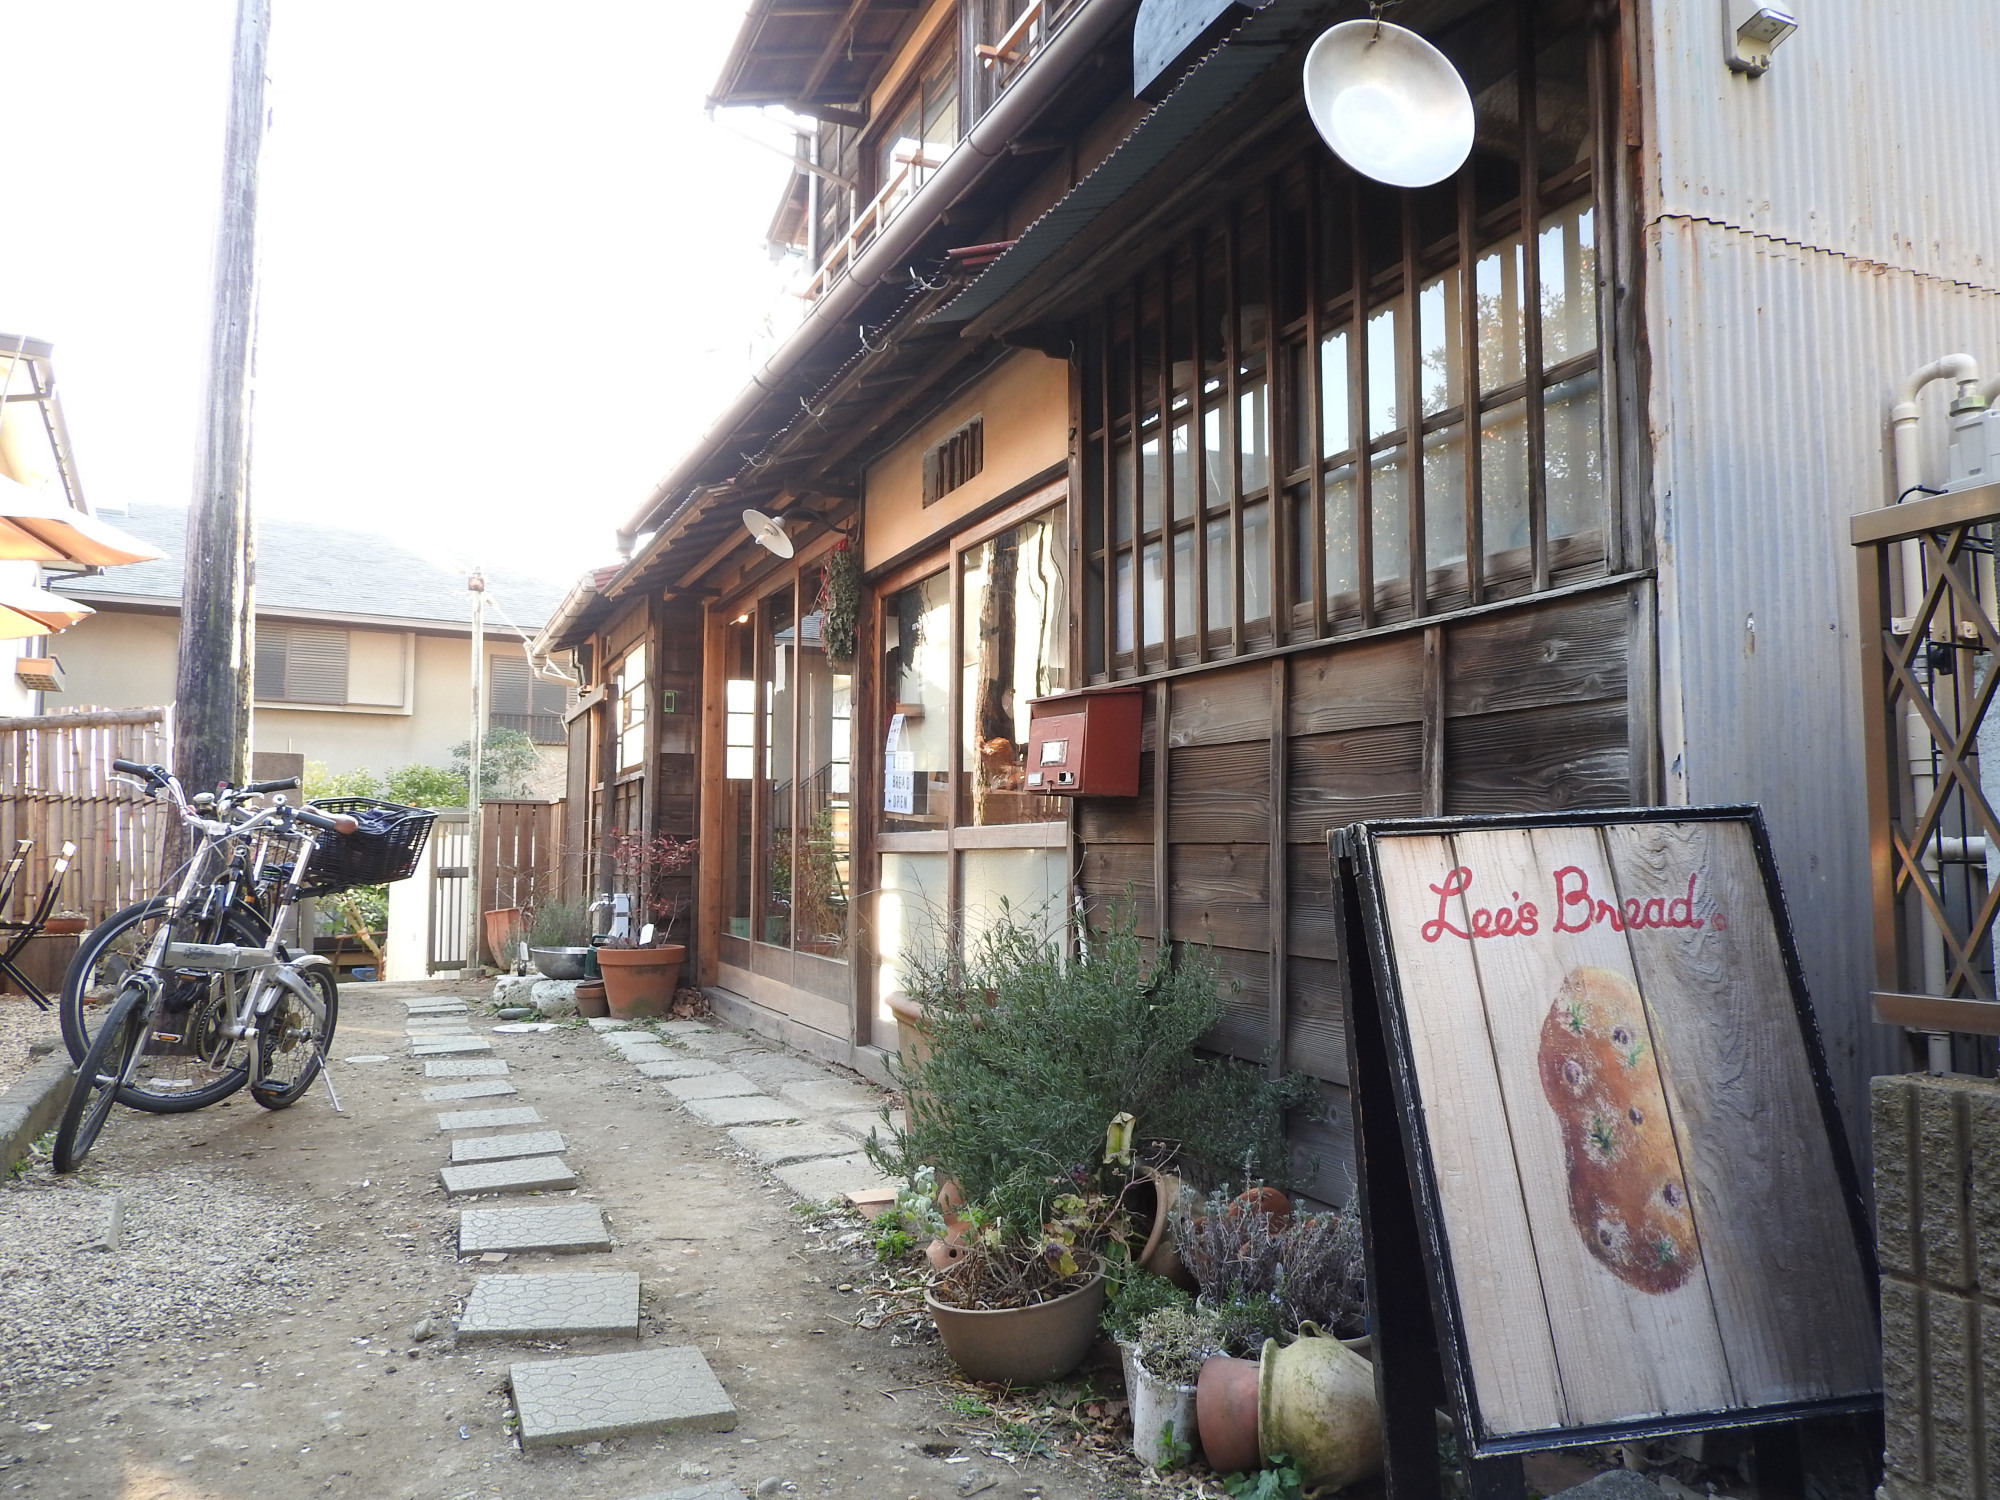 Follow your nose: Lee's Bread is located in a cluster of old wooden buildings on a side street in Oiso, Kanagawa Prefecture. | JOAN BAILEY